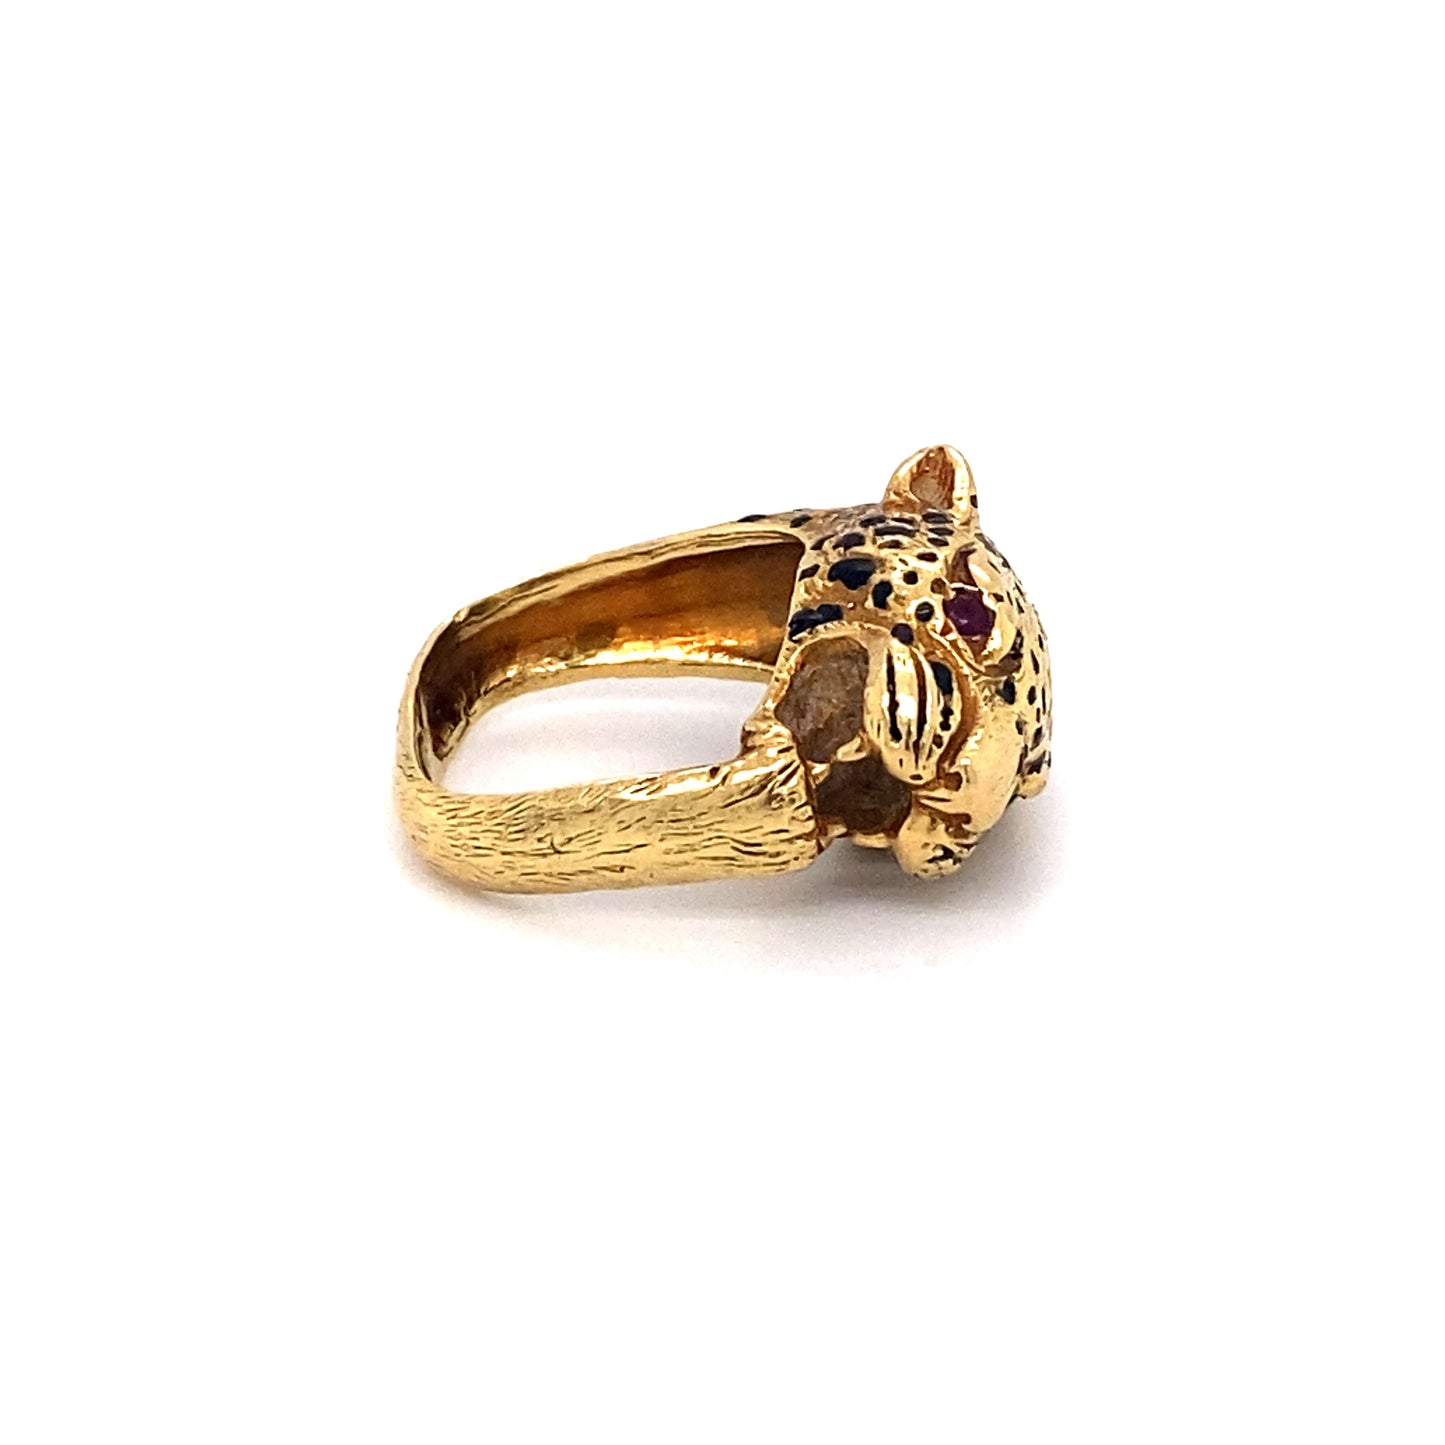 Vintage French 18K Gold Leopard Ring with Ruby Eyes